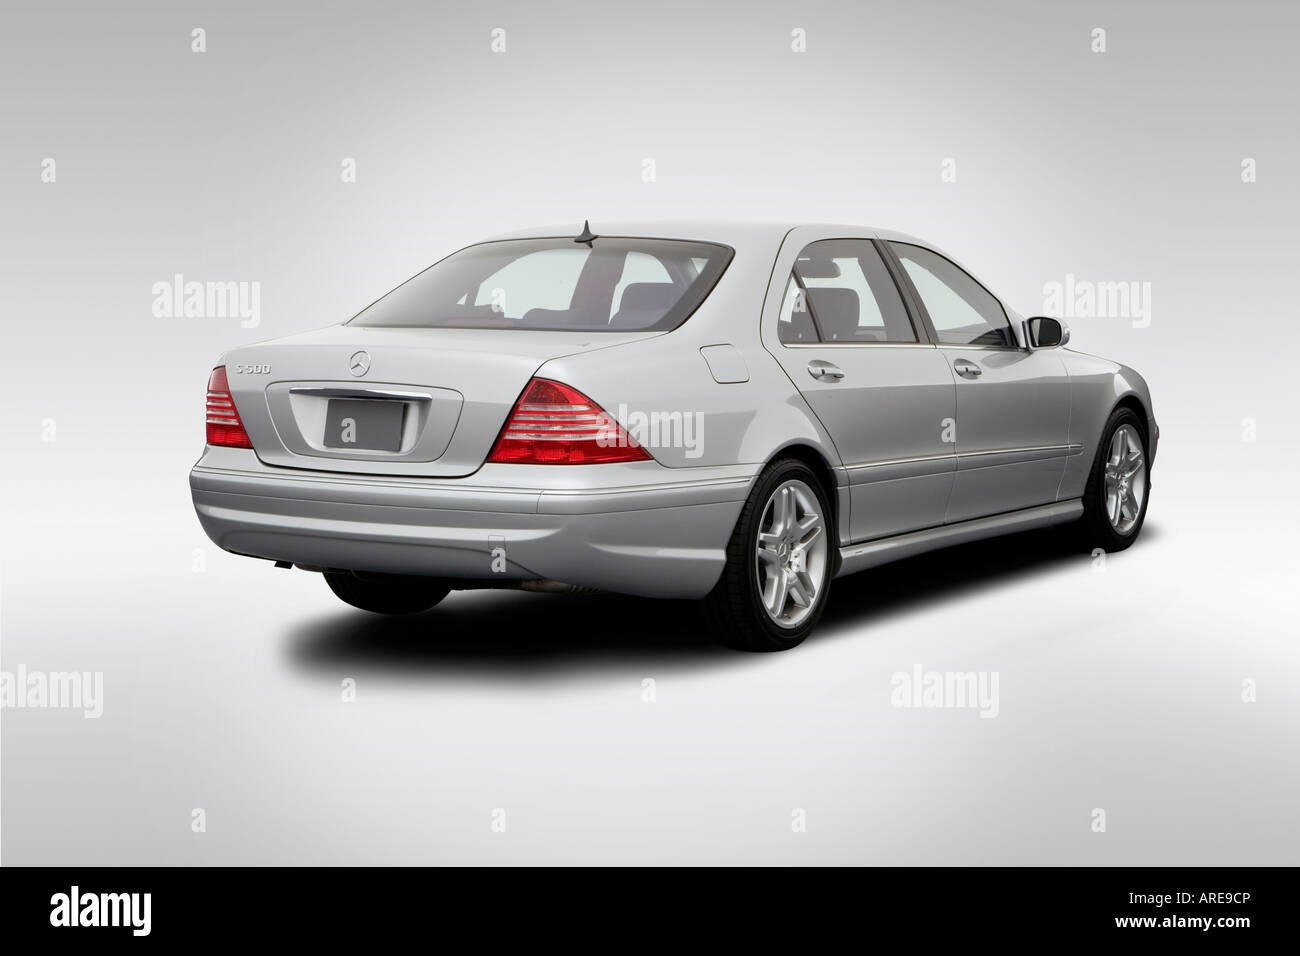 2006 Mercedes Benz S500 In Silver Rear Angle View Stock Photo Alamy